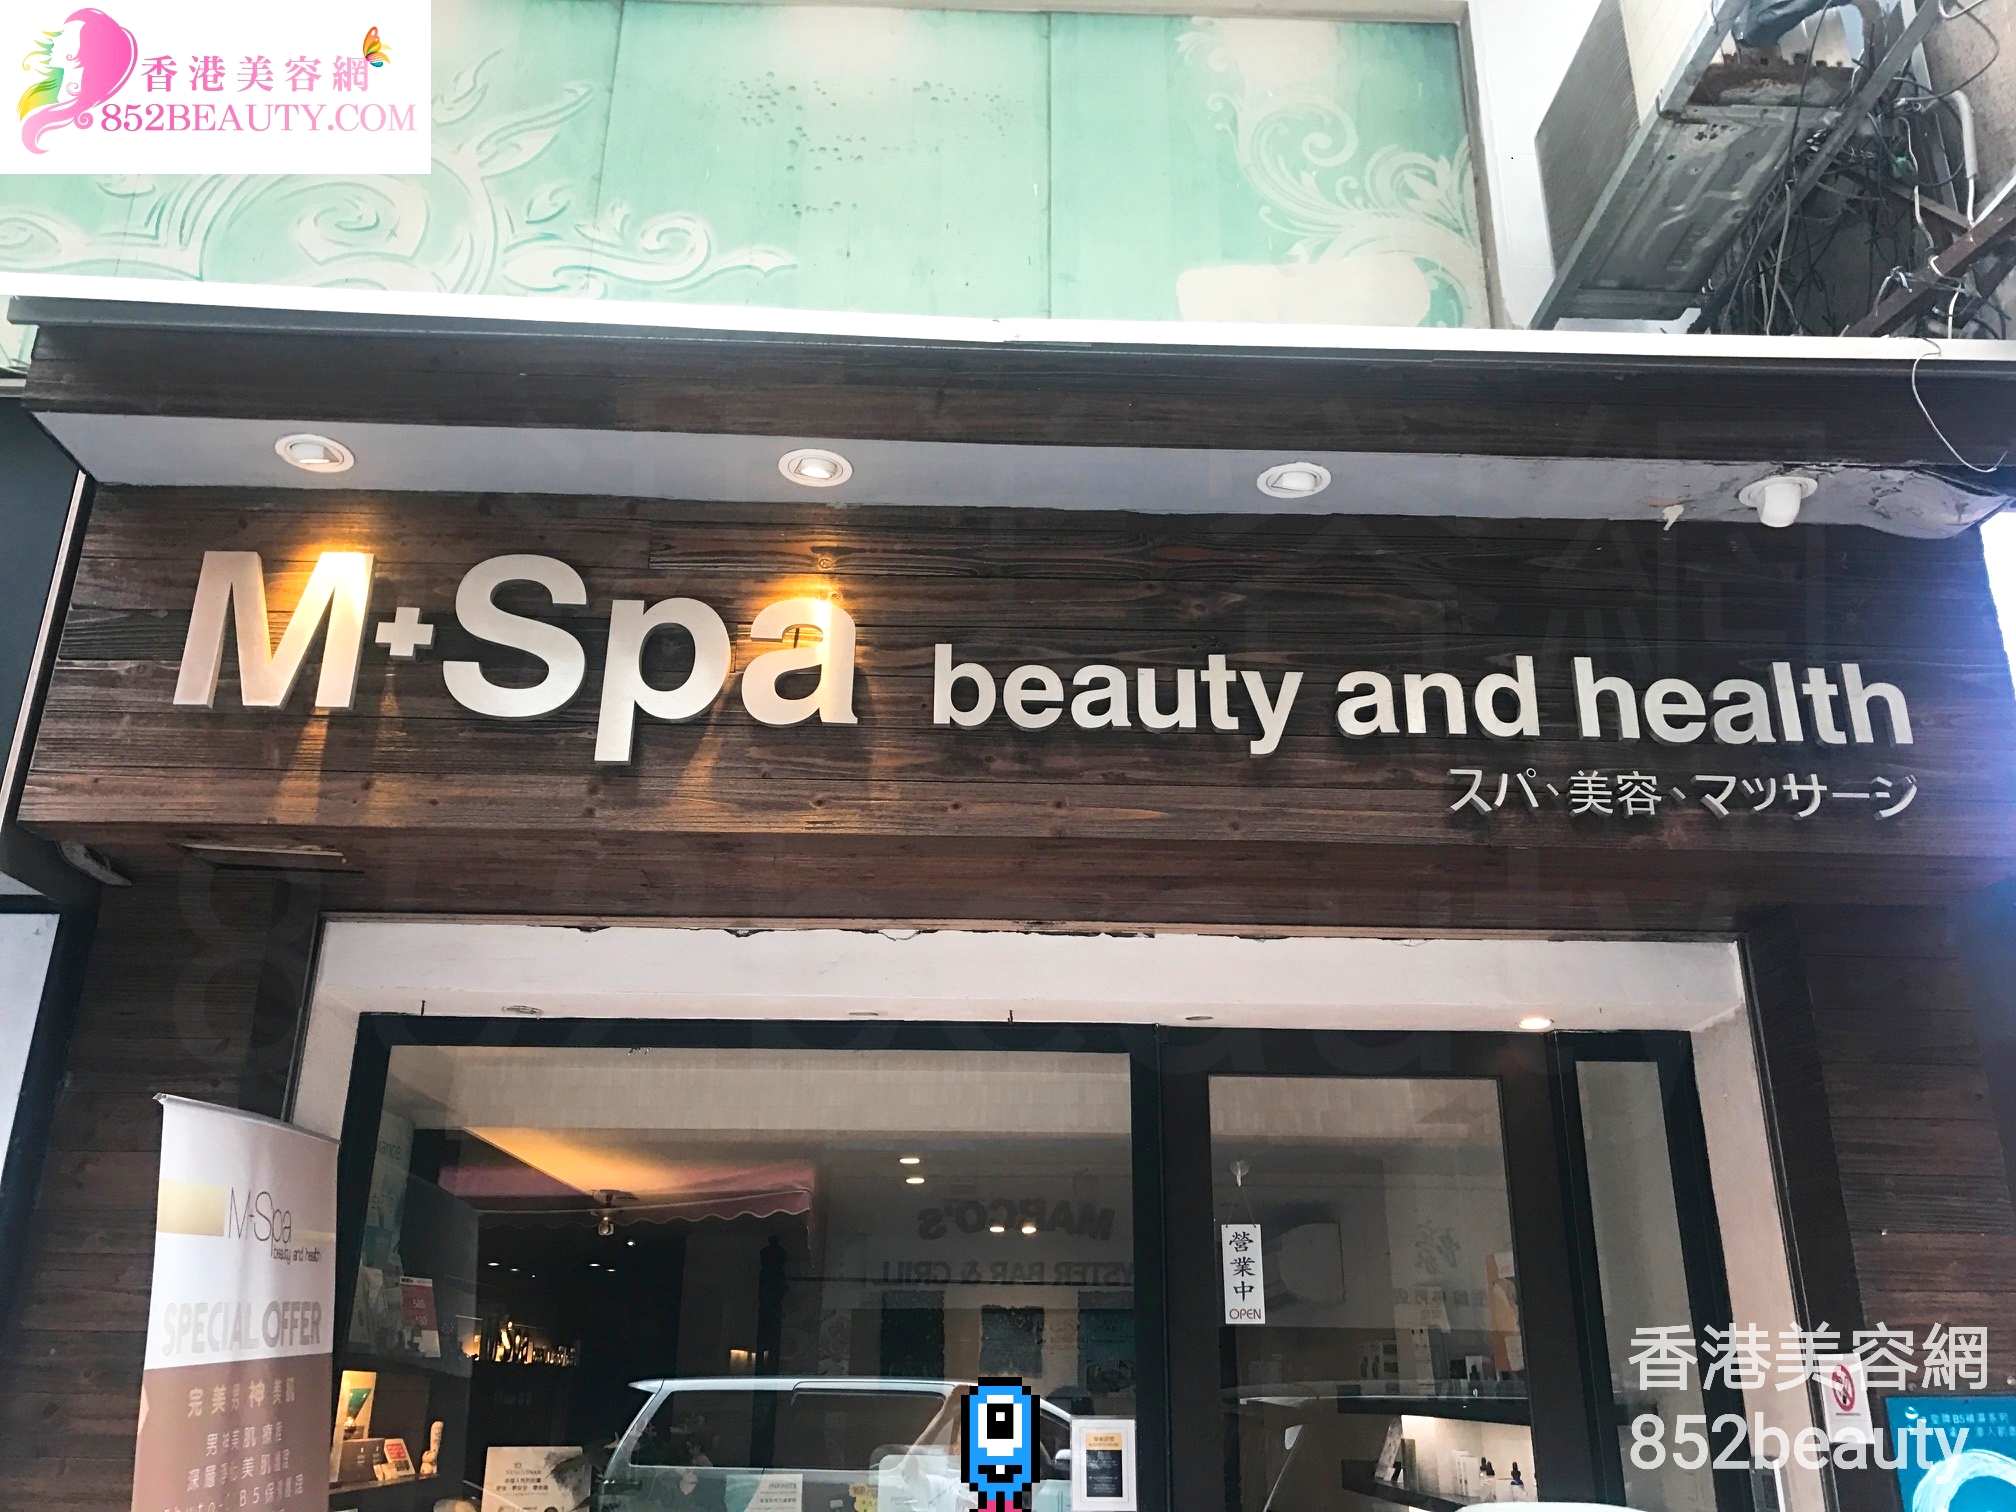 Men Grooming: M+Spa beauty and health